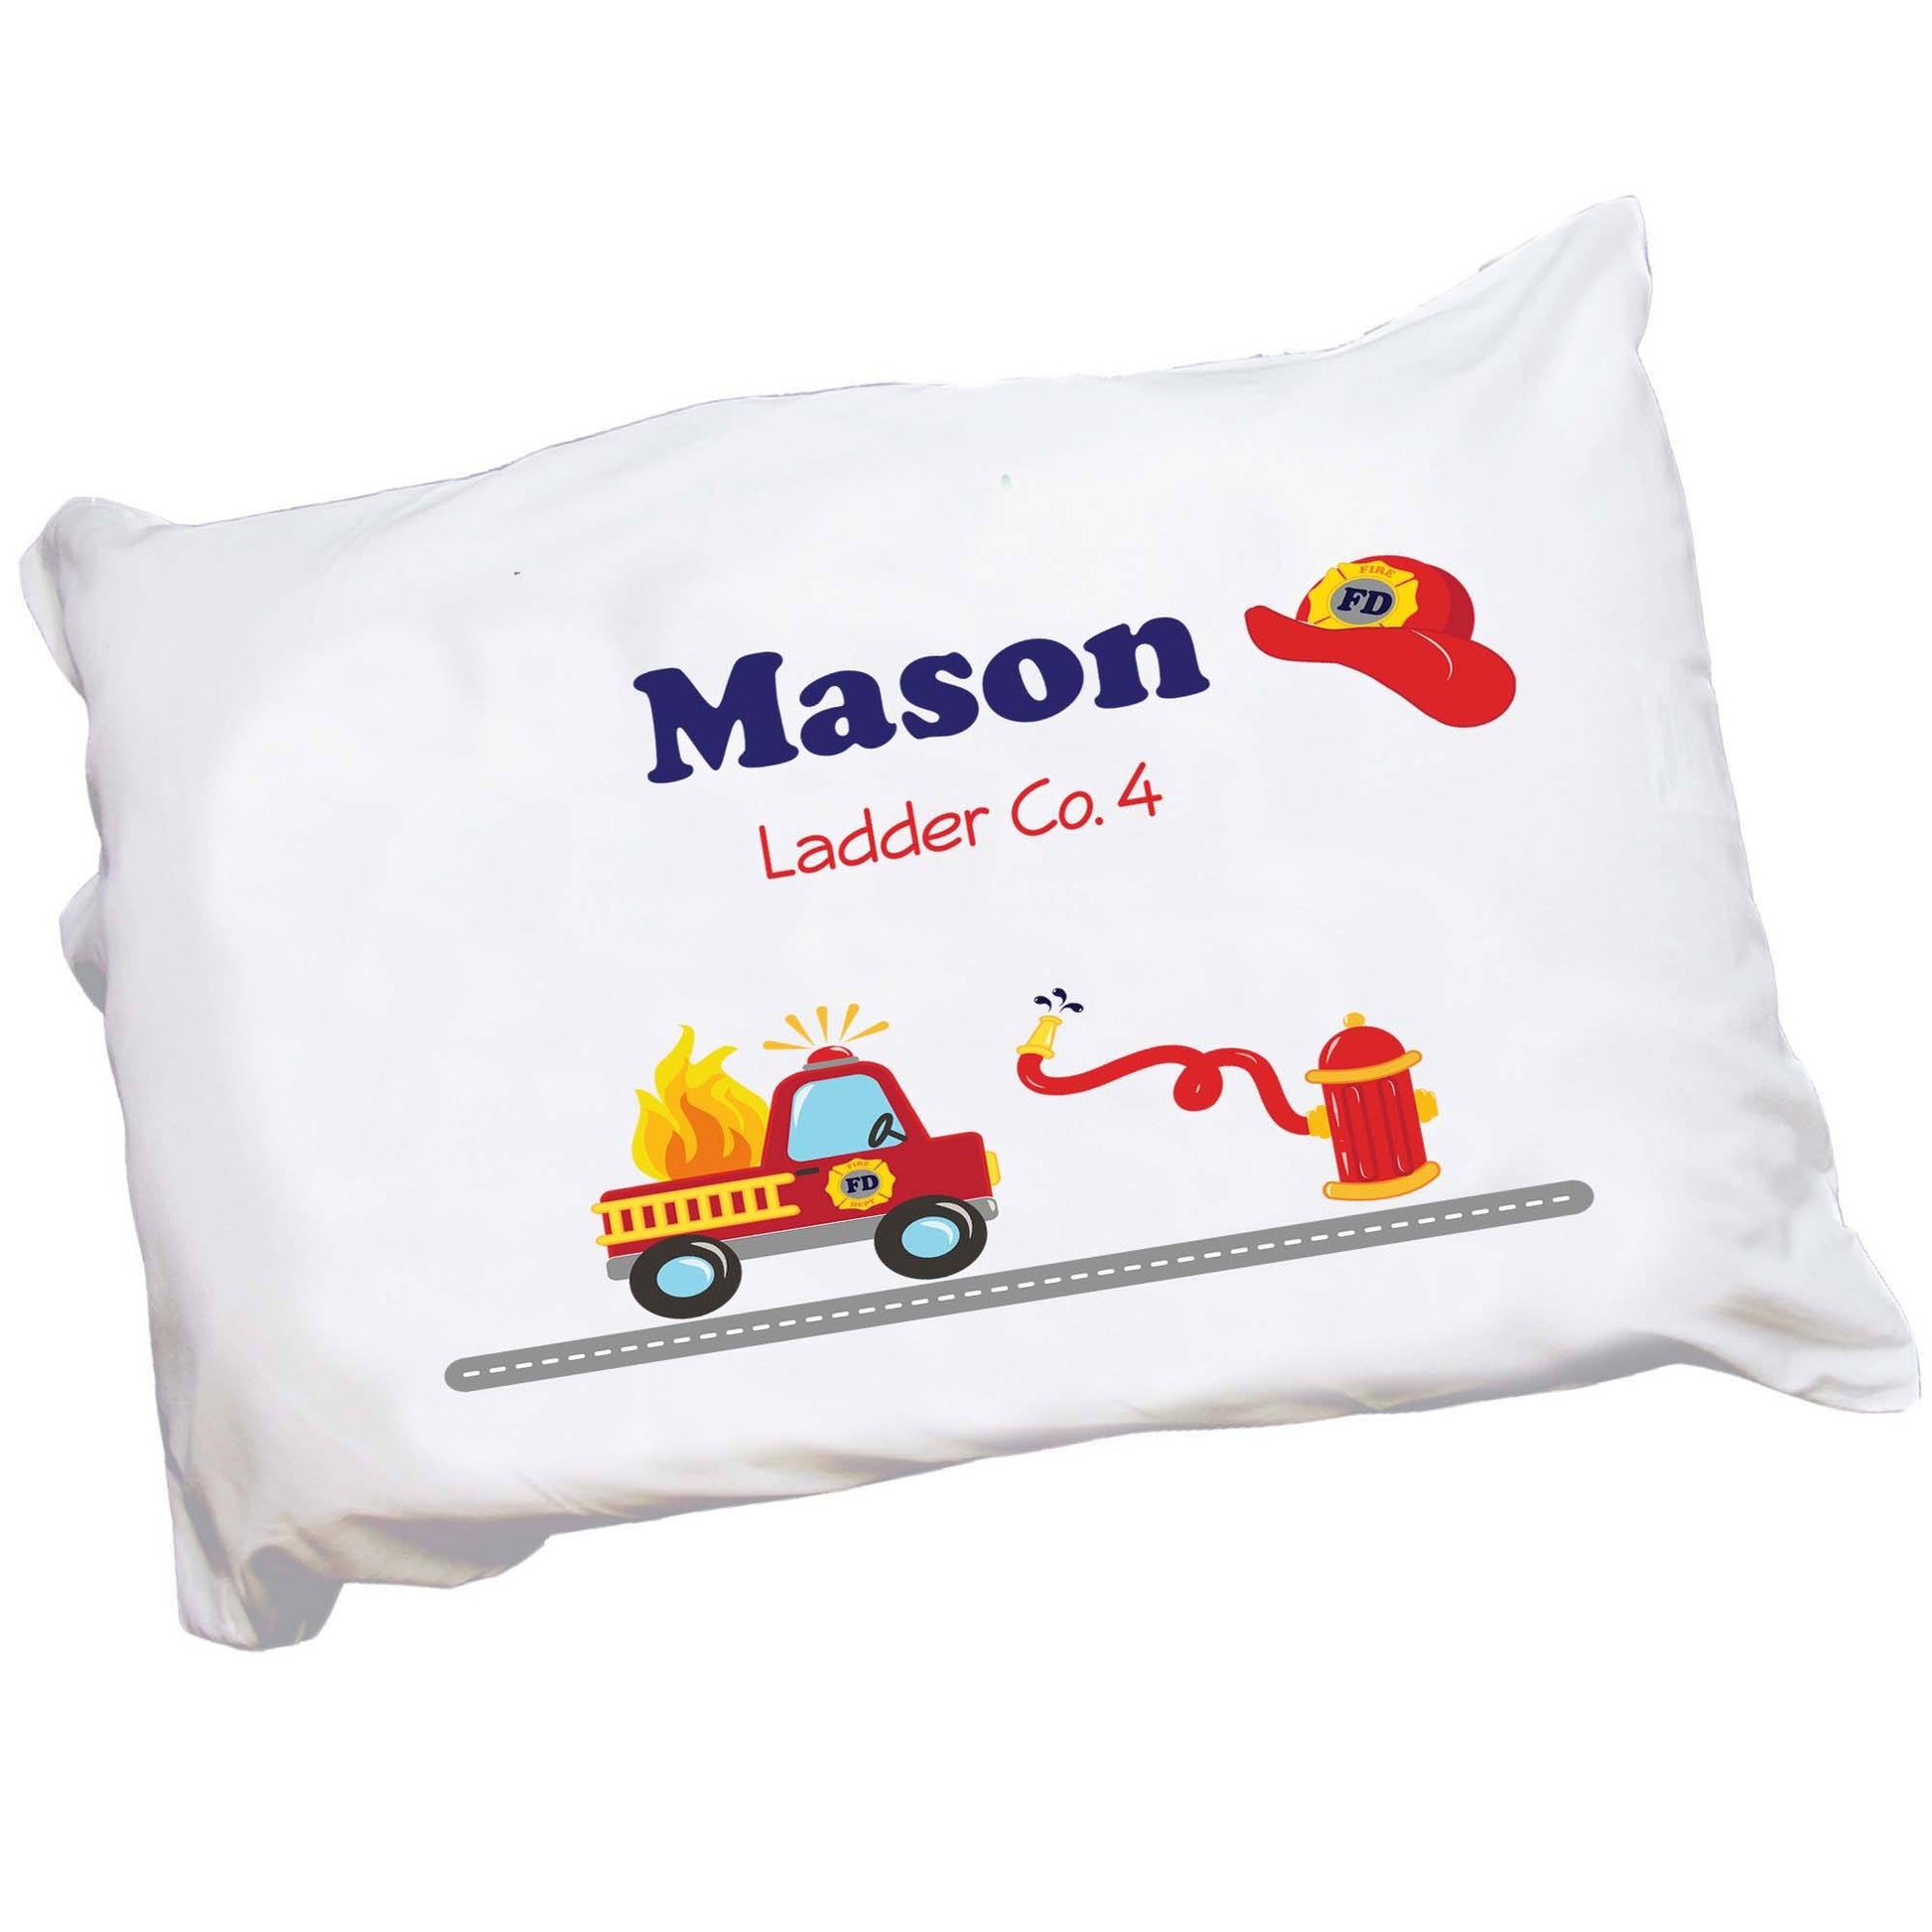 Personalized Childrens Pillowcase with Fire Truck design